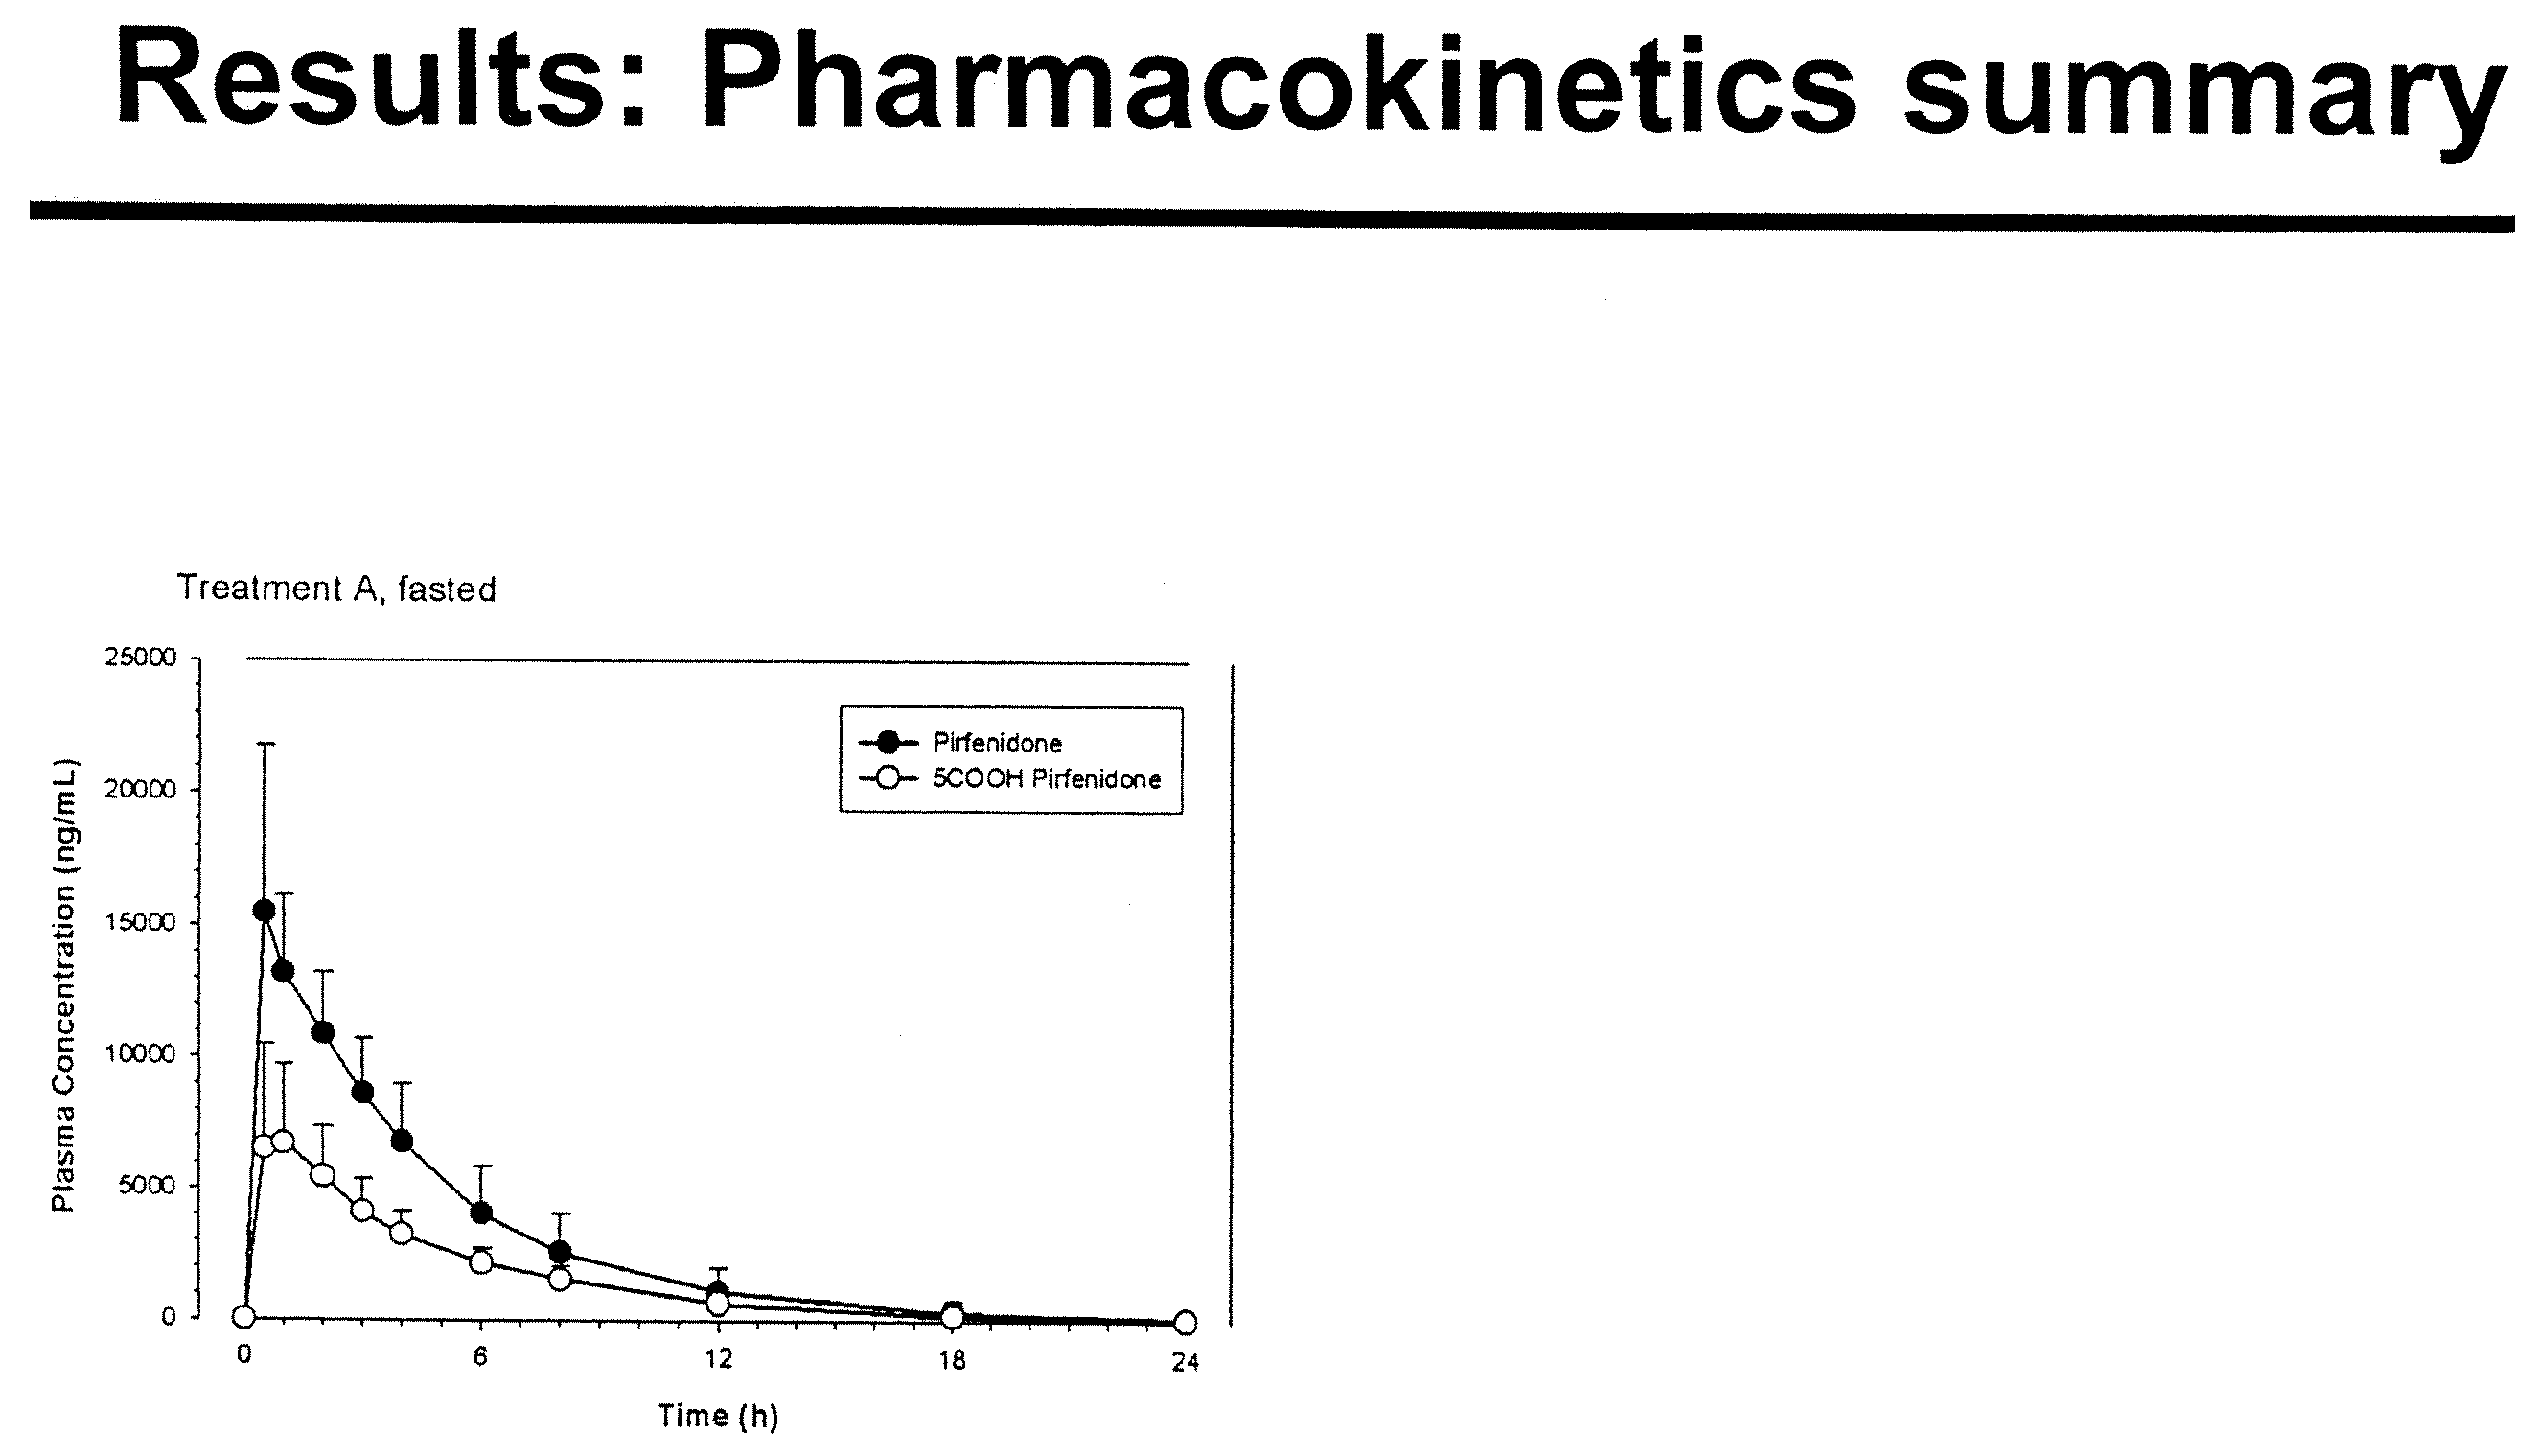 Altering pharmacokinetics of pirfenidone therapy